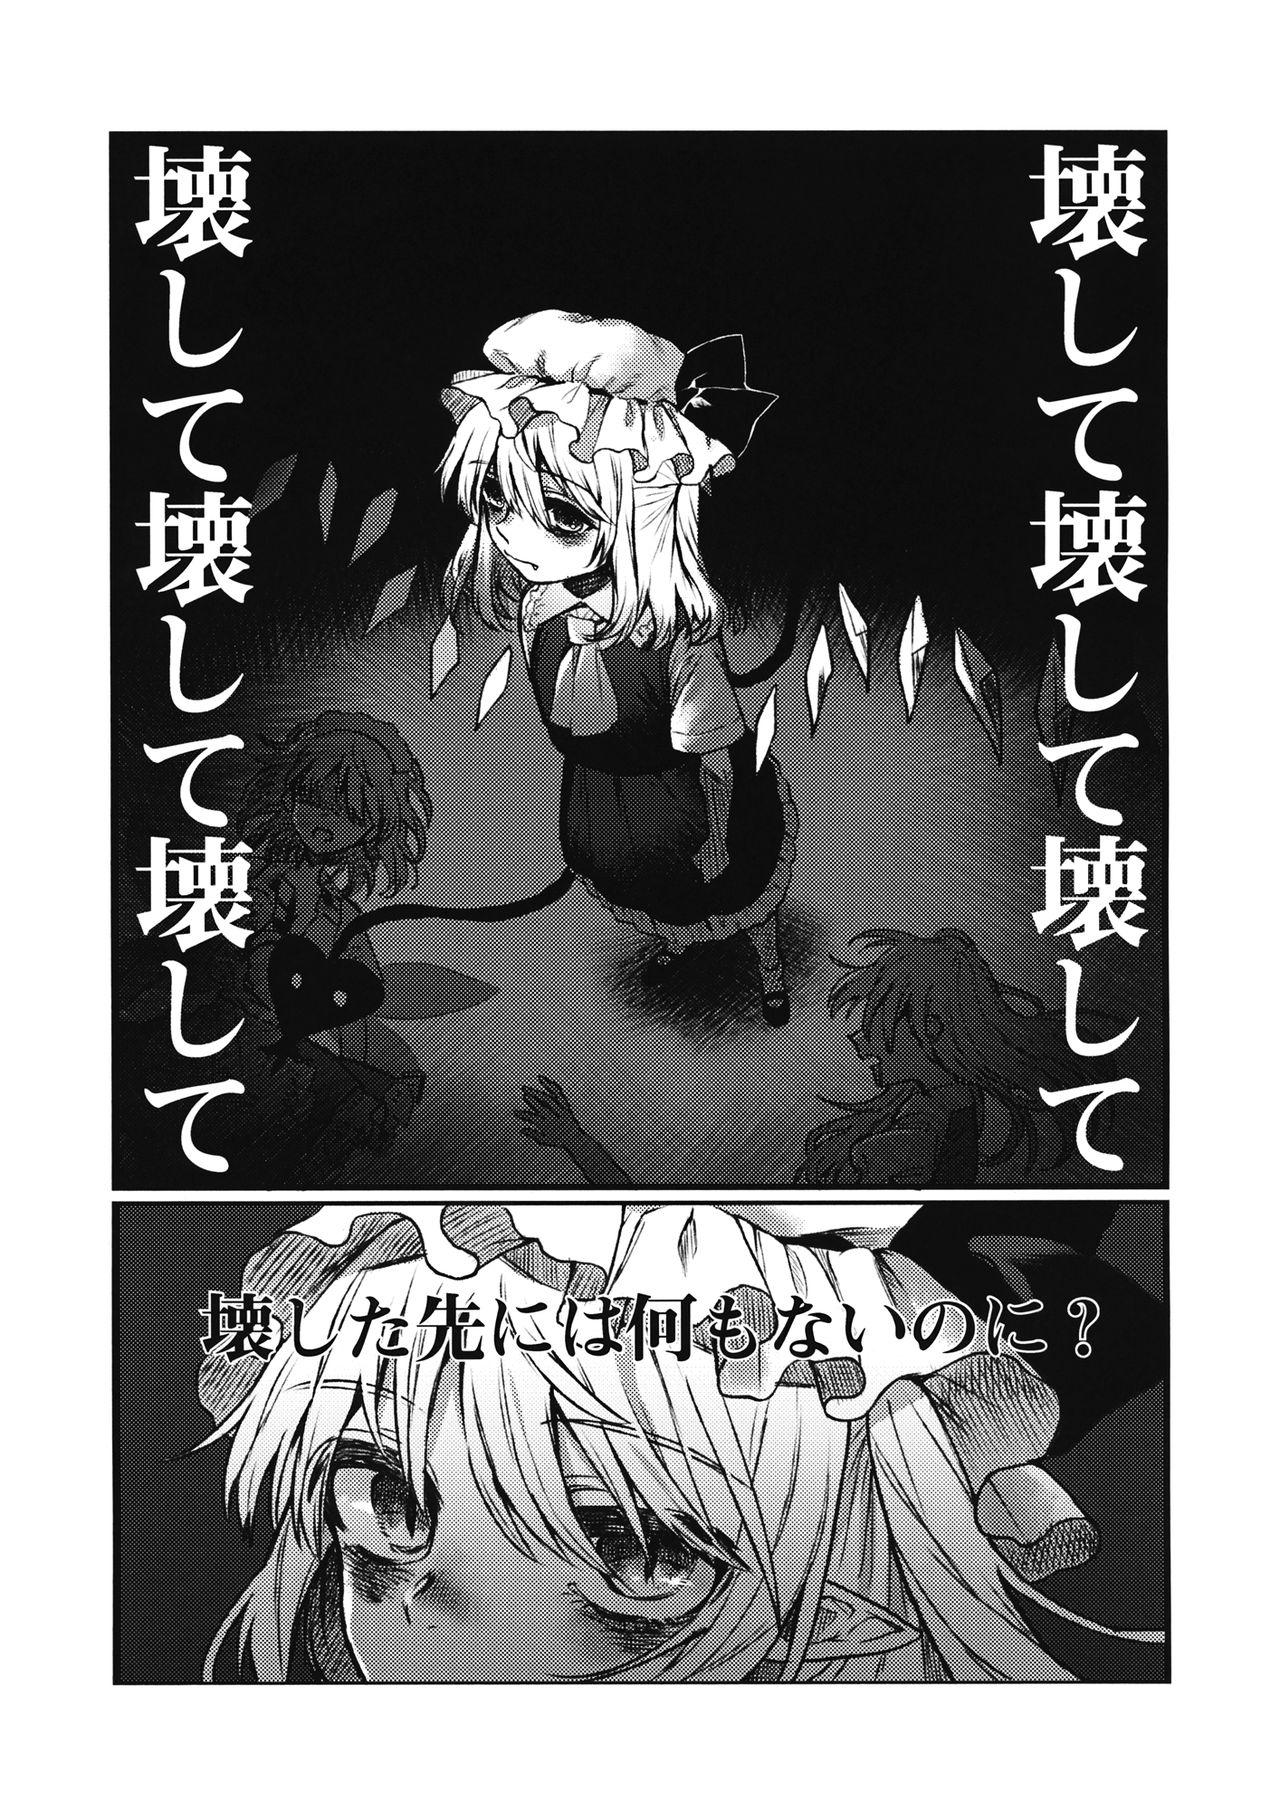 Stroking Maid Flandre Kansatsu Nikki - Maid Flandre observation diary - Touhou project Bed - Page 2